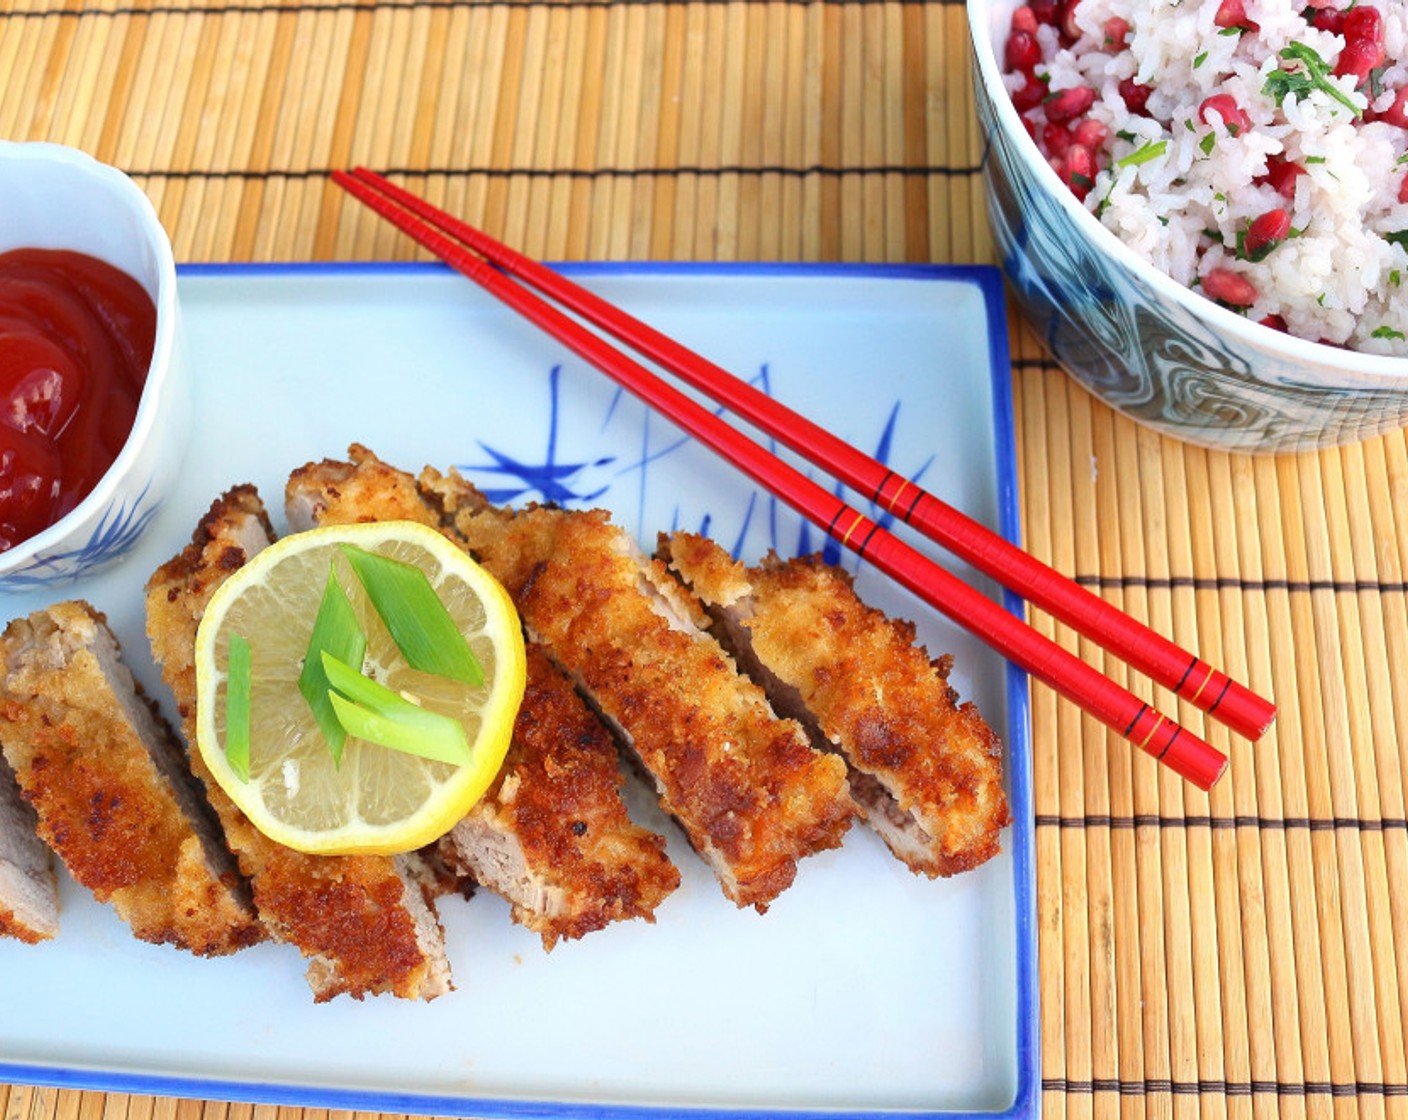 step 7 Serve tonkatsu with Lemons (6 slices) and Scallions (to taste). Serve the rice on the side. Enjoy!